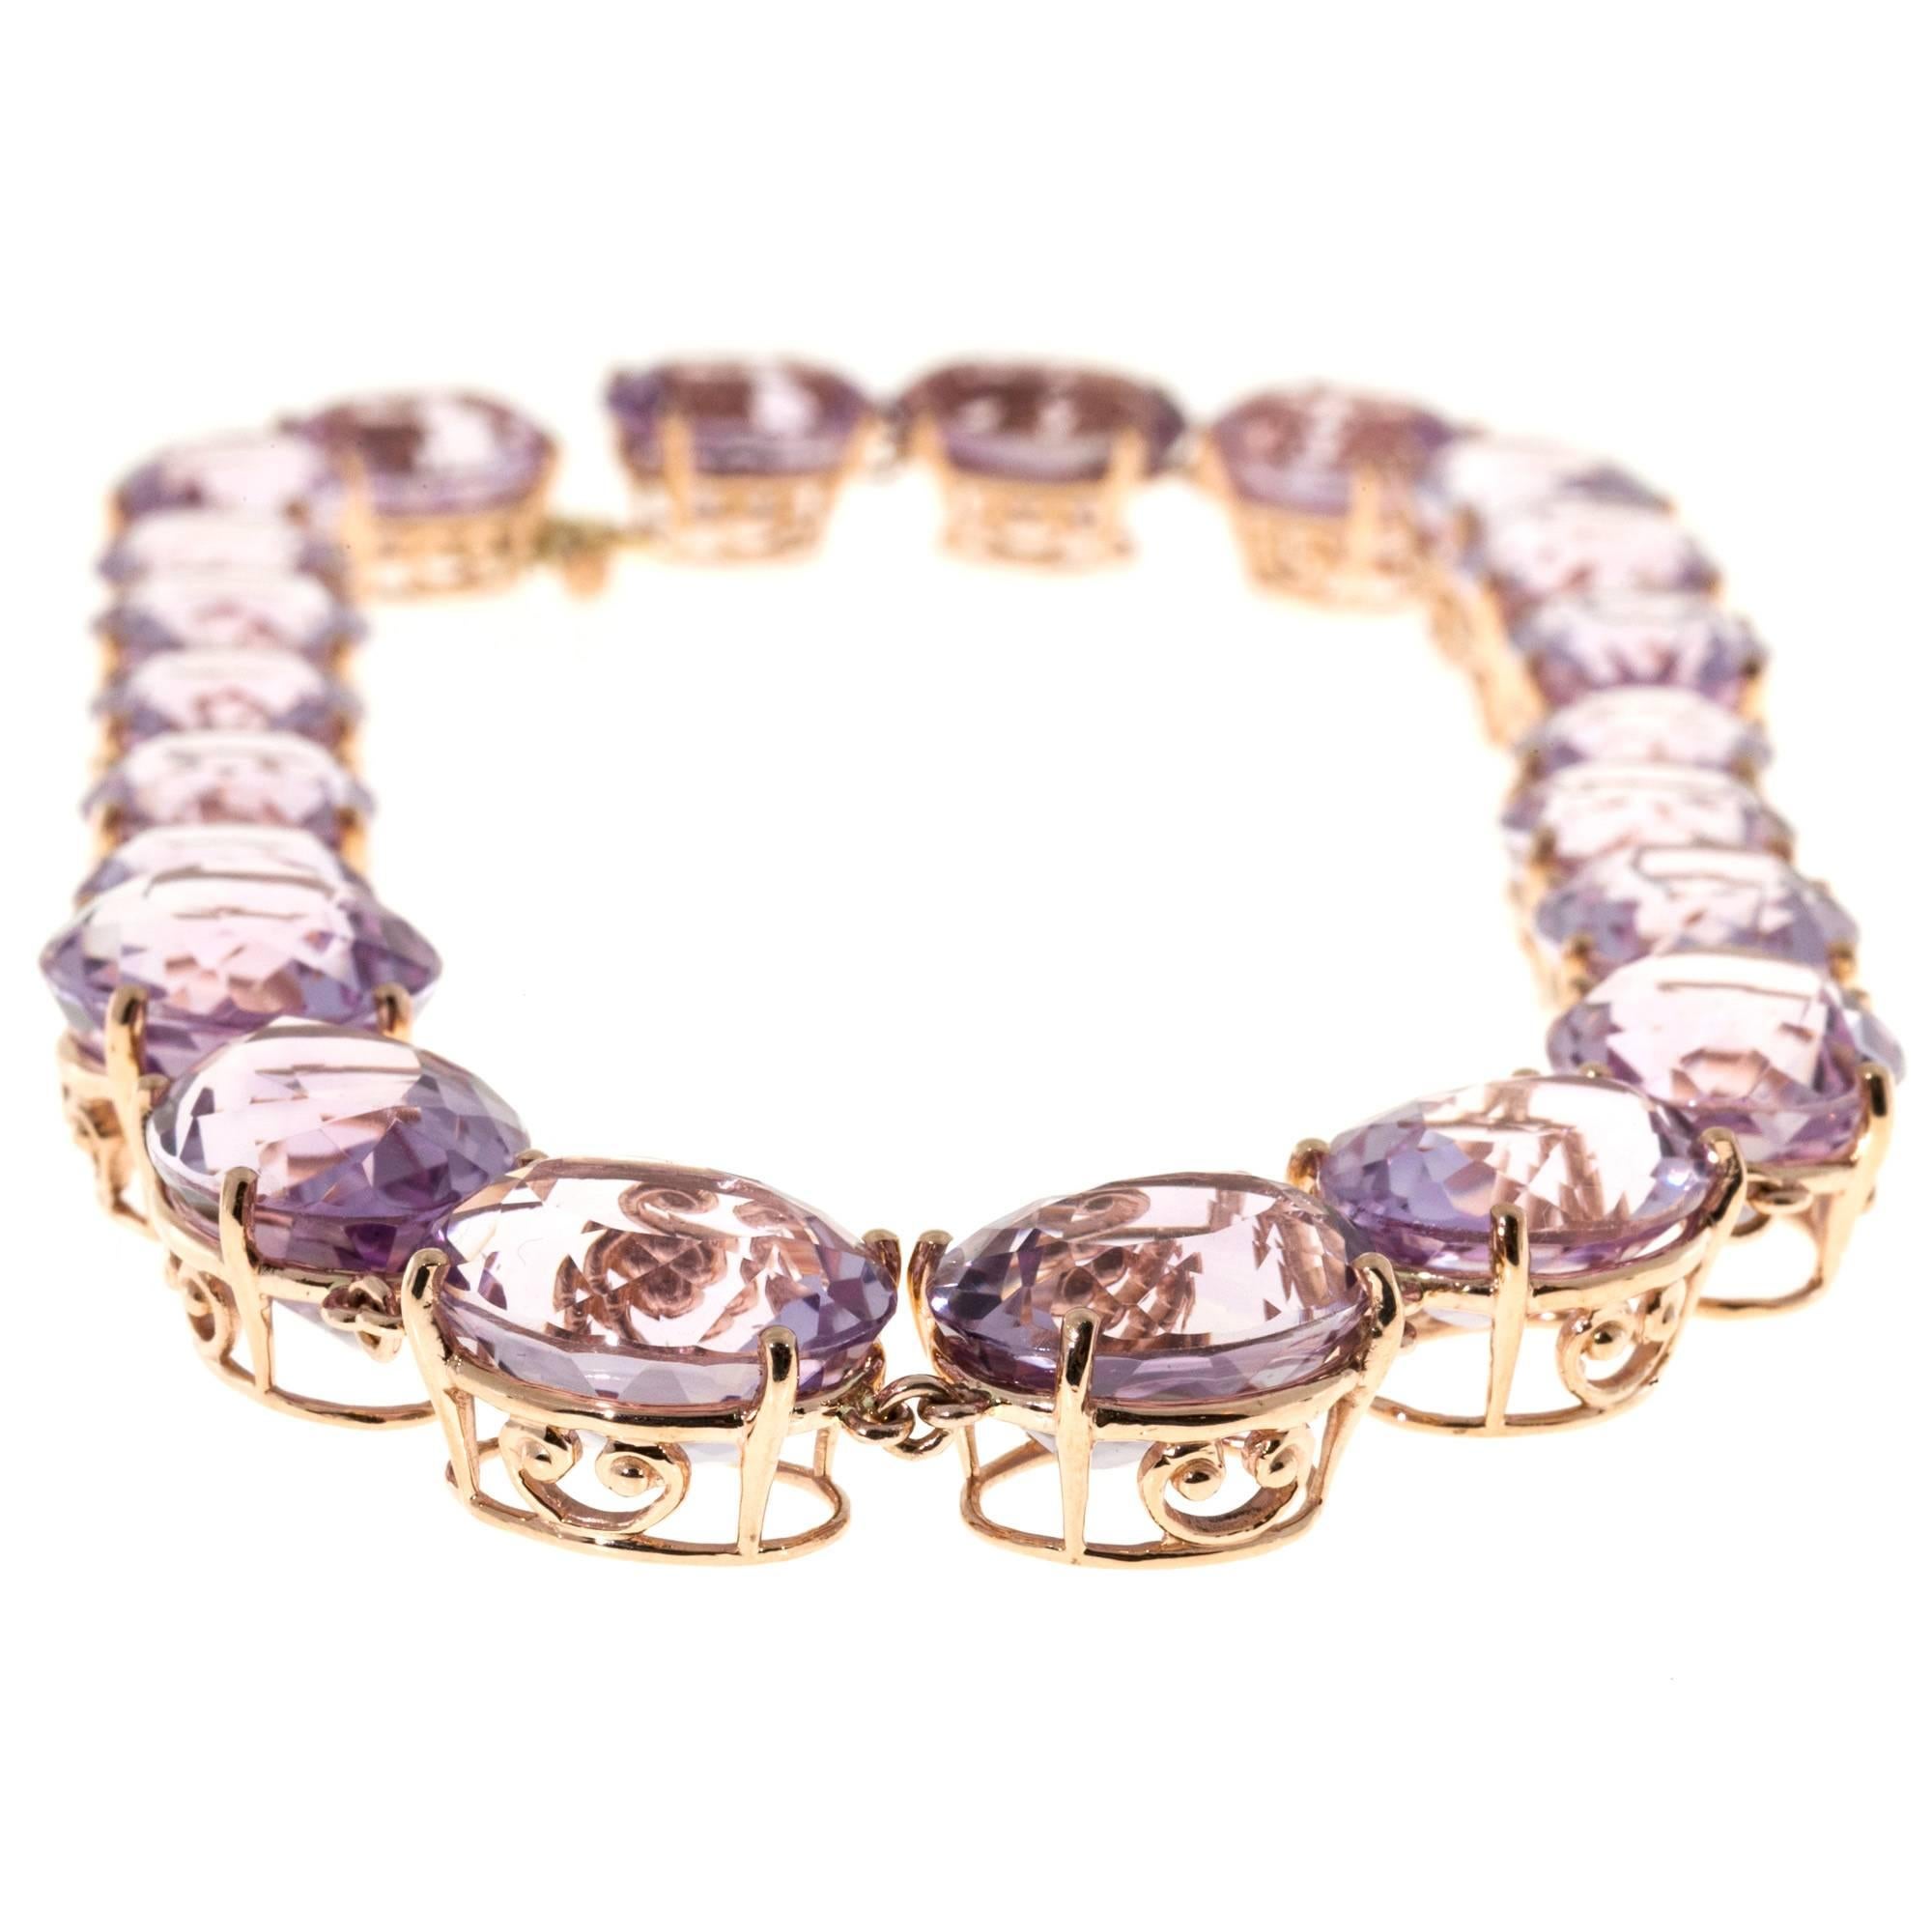 Lilac purple untreated Amethyst Riviere Necklace. The stones are natural and slightly different shape and depth. Rose gold settings were made for each stone in the original style of scroll basket. All Amethyst were re-polished. A Bracelet is